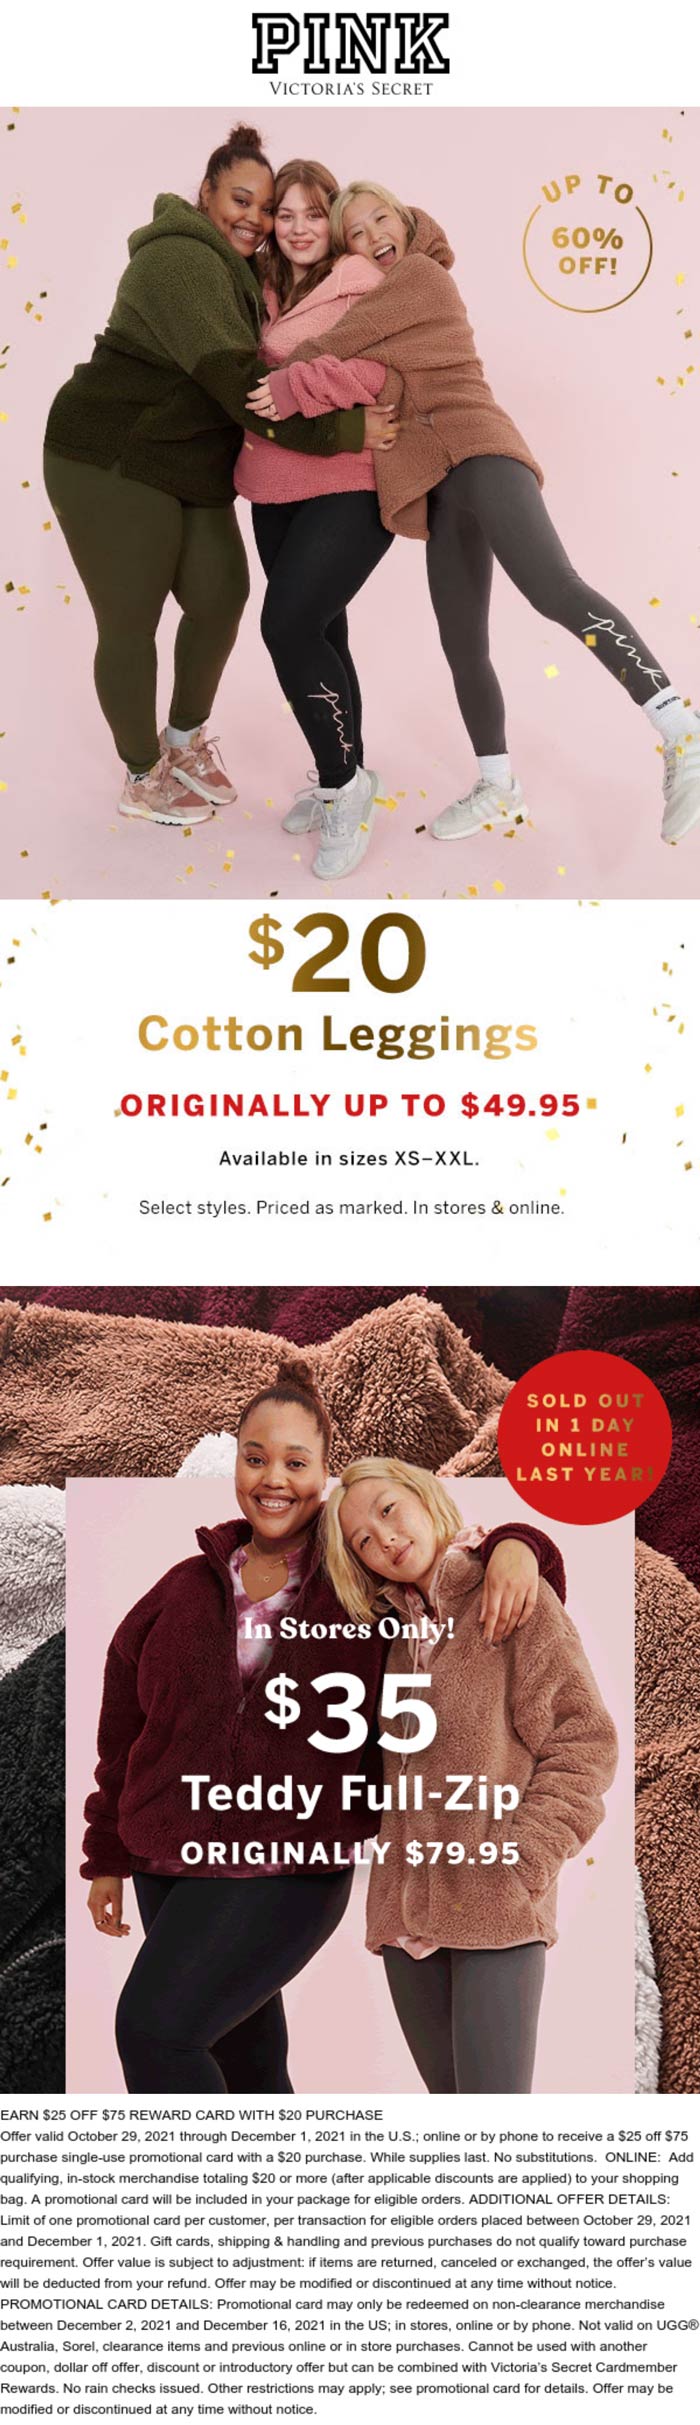 PINK stores Coupon  $20 leggings today at Victorias Secret PINK, ditto online #pink 